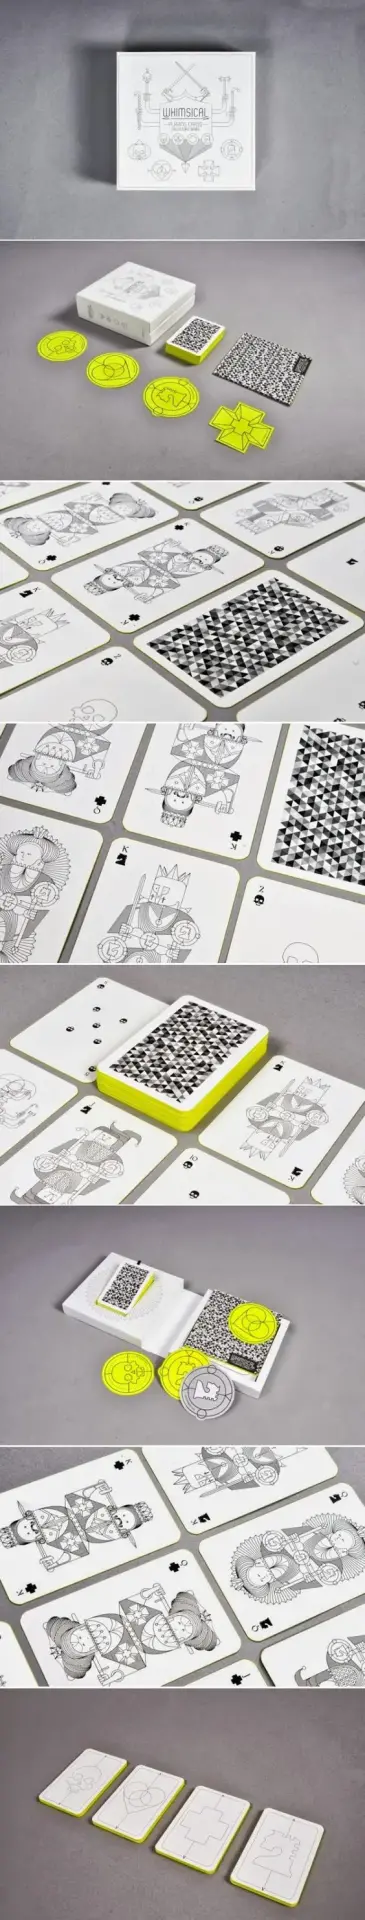 Whimsical playing cards collectors